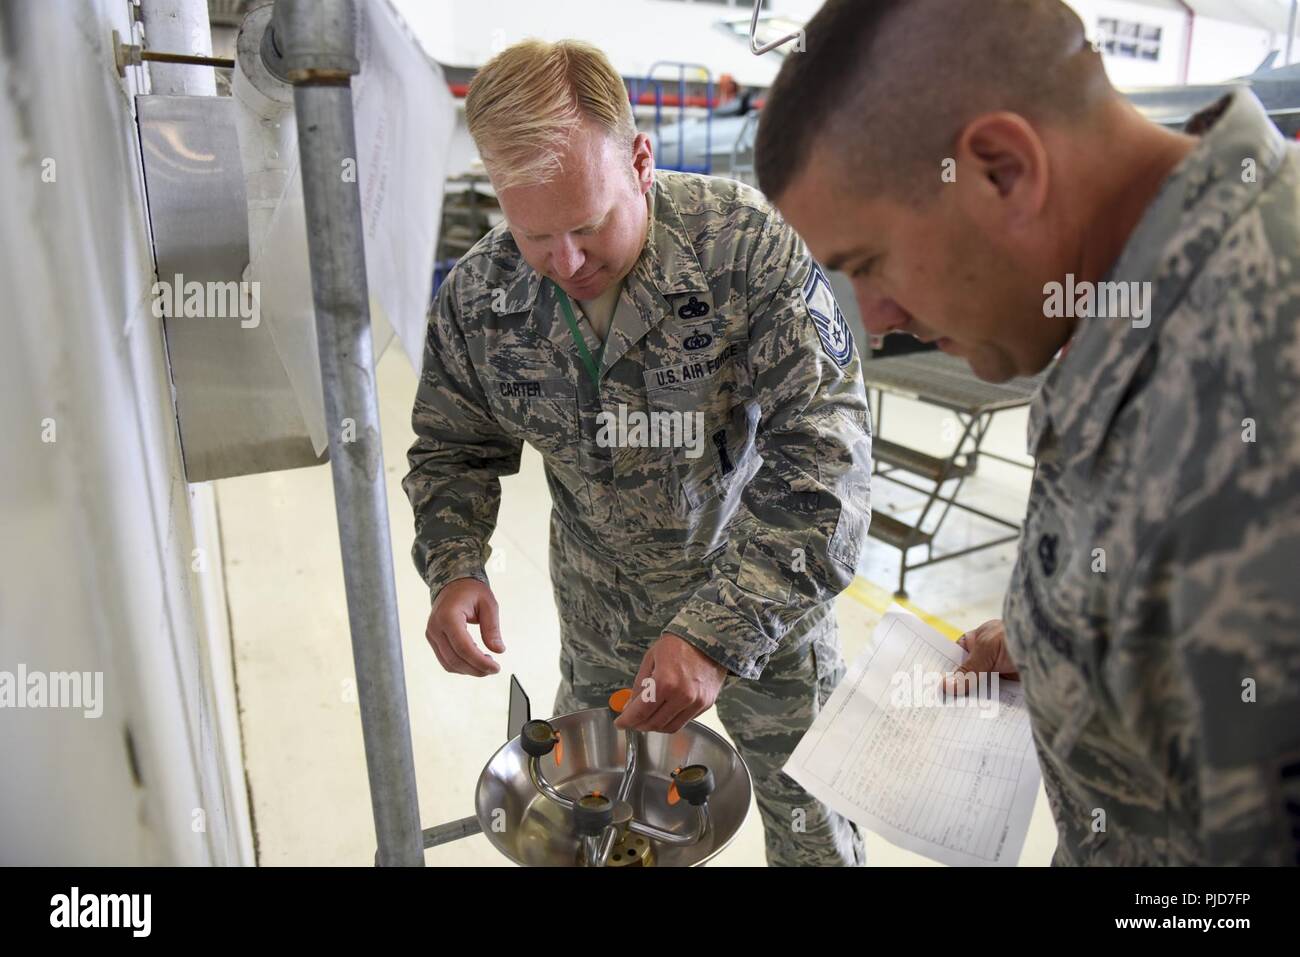 Master Sgt. Joseph Carter, occupational health and safety superintendent at the 180th Fighter Wing in Swanton, Ohio, inspects an eye wash station July 15, 2018. Carter received the 2017 Air National Guard Outstanding Individual Occupational Safety Award for superior performance and contributions to the Air Force. Stock Photo